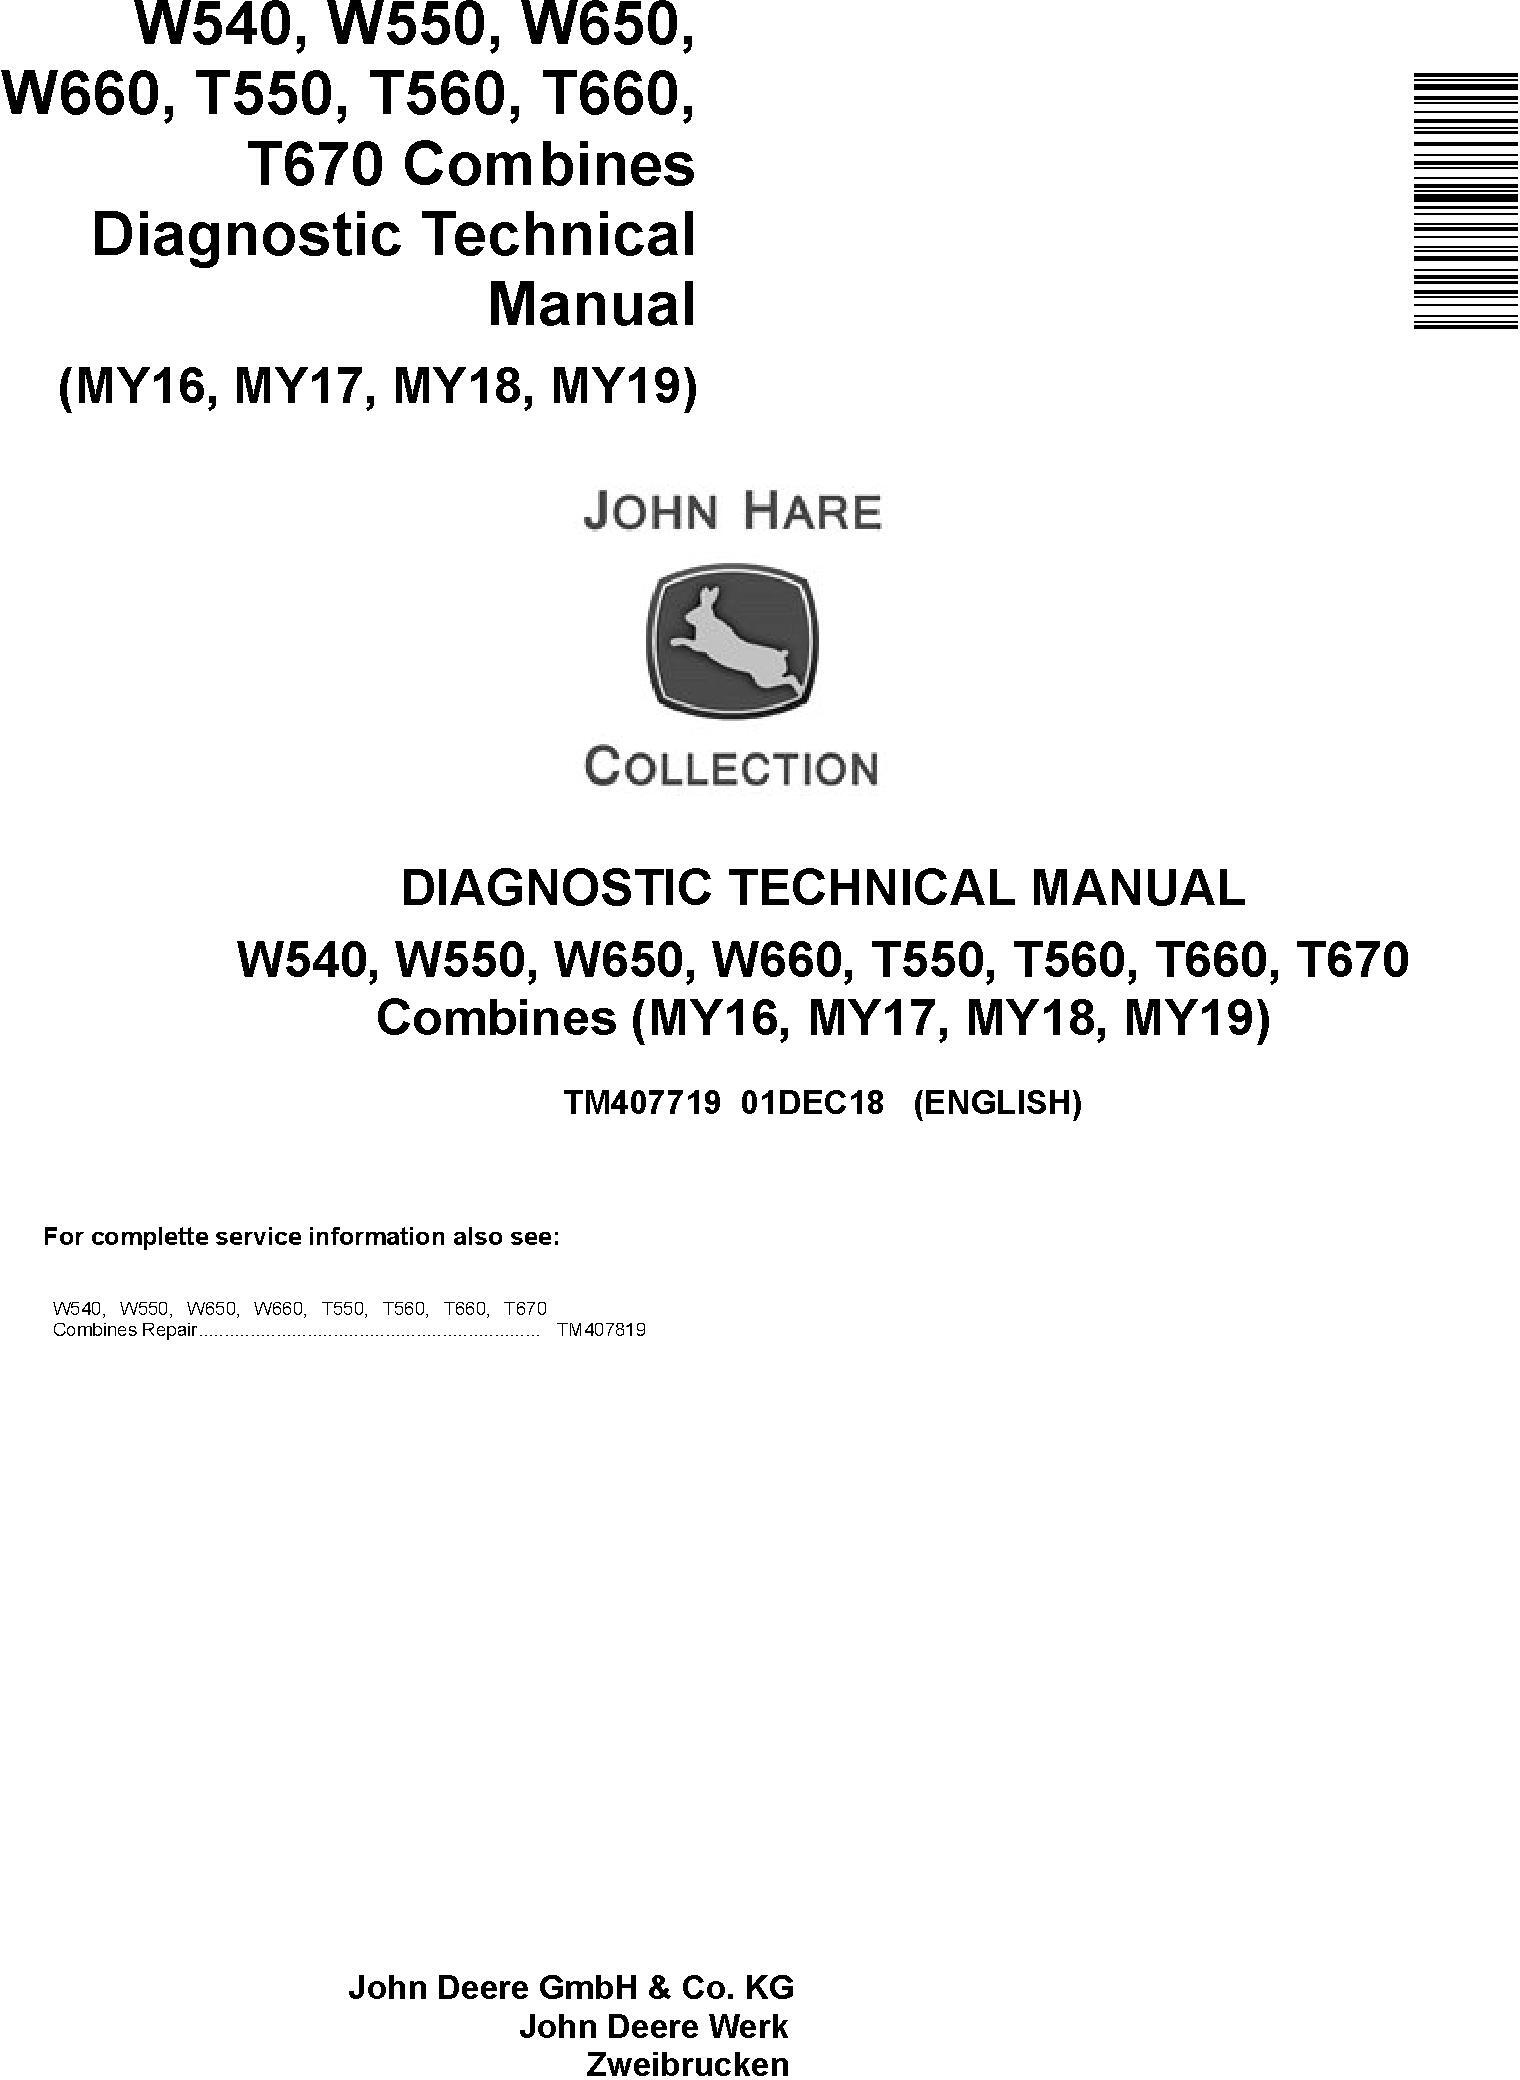 John Deere W540 to W660, T550 to T670 Combine Diagnostic Technical Manual TM407719